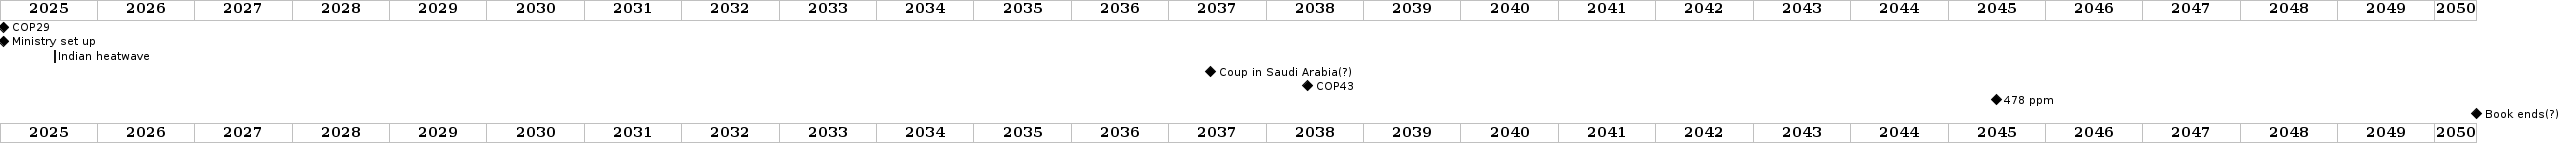 ministry-future-timeline.png